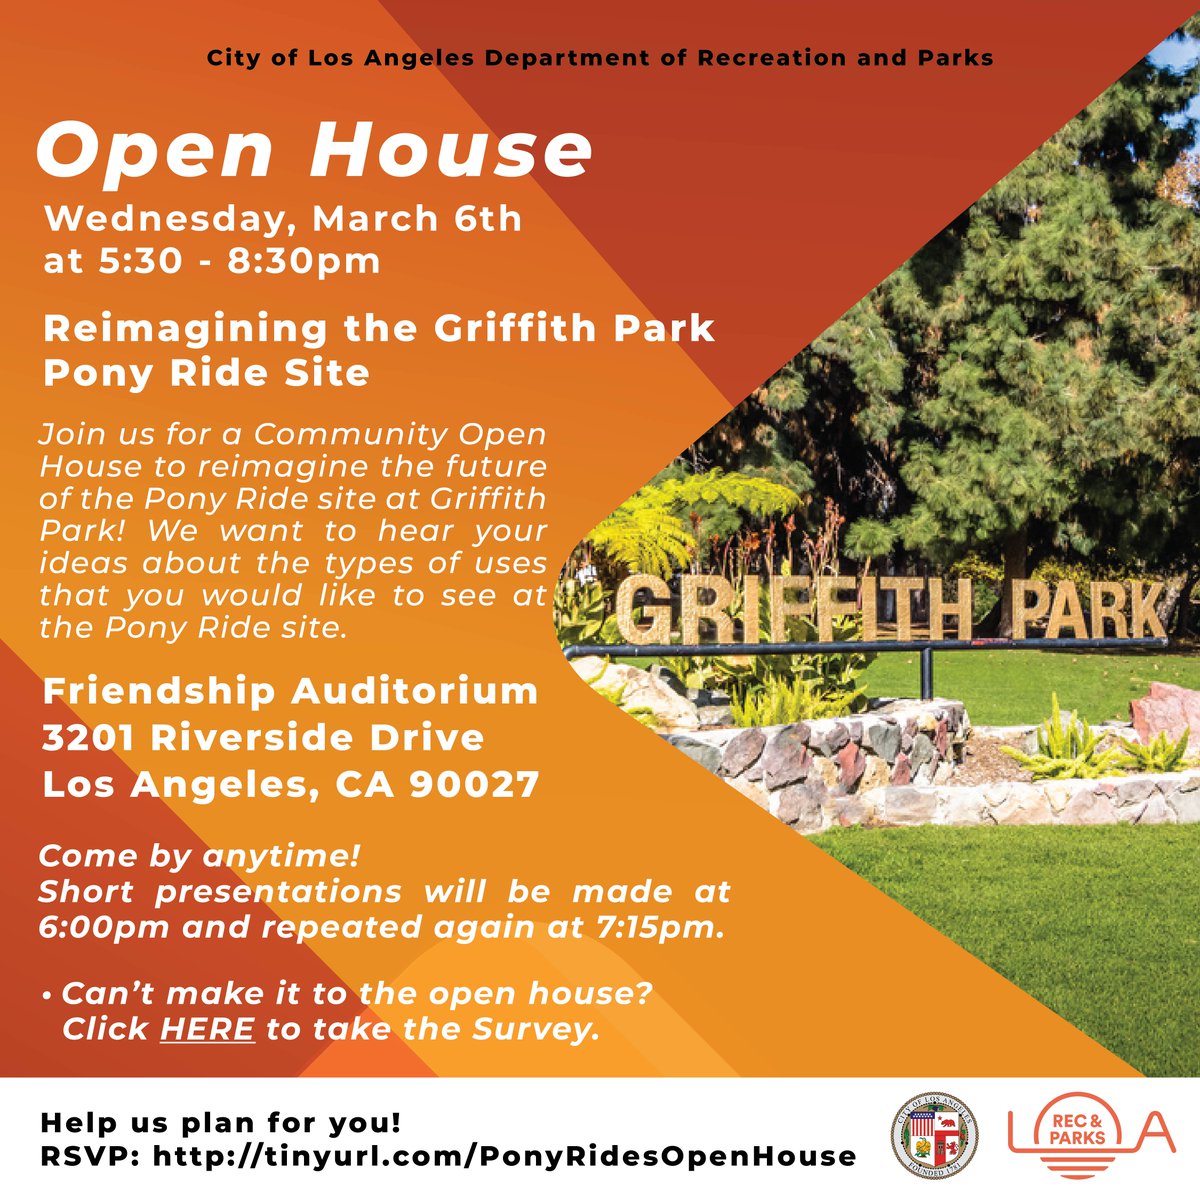 Join us March 6th from 5:30 - 8:30pm for an OPEN HOUSE to reimage the future of the Pony Ride site at Griffith Park! We want to hear your ideas about the types of uses that you would like to see at the Pony Ride site. RSVP here: tinyurl.com/PonyRidesOpenH…